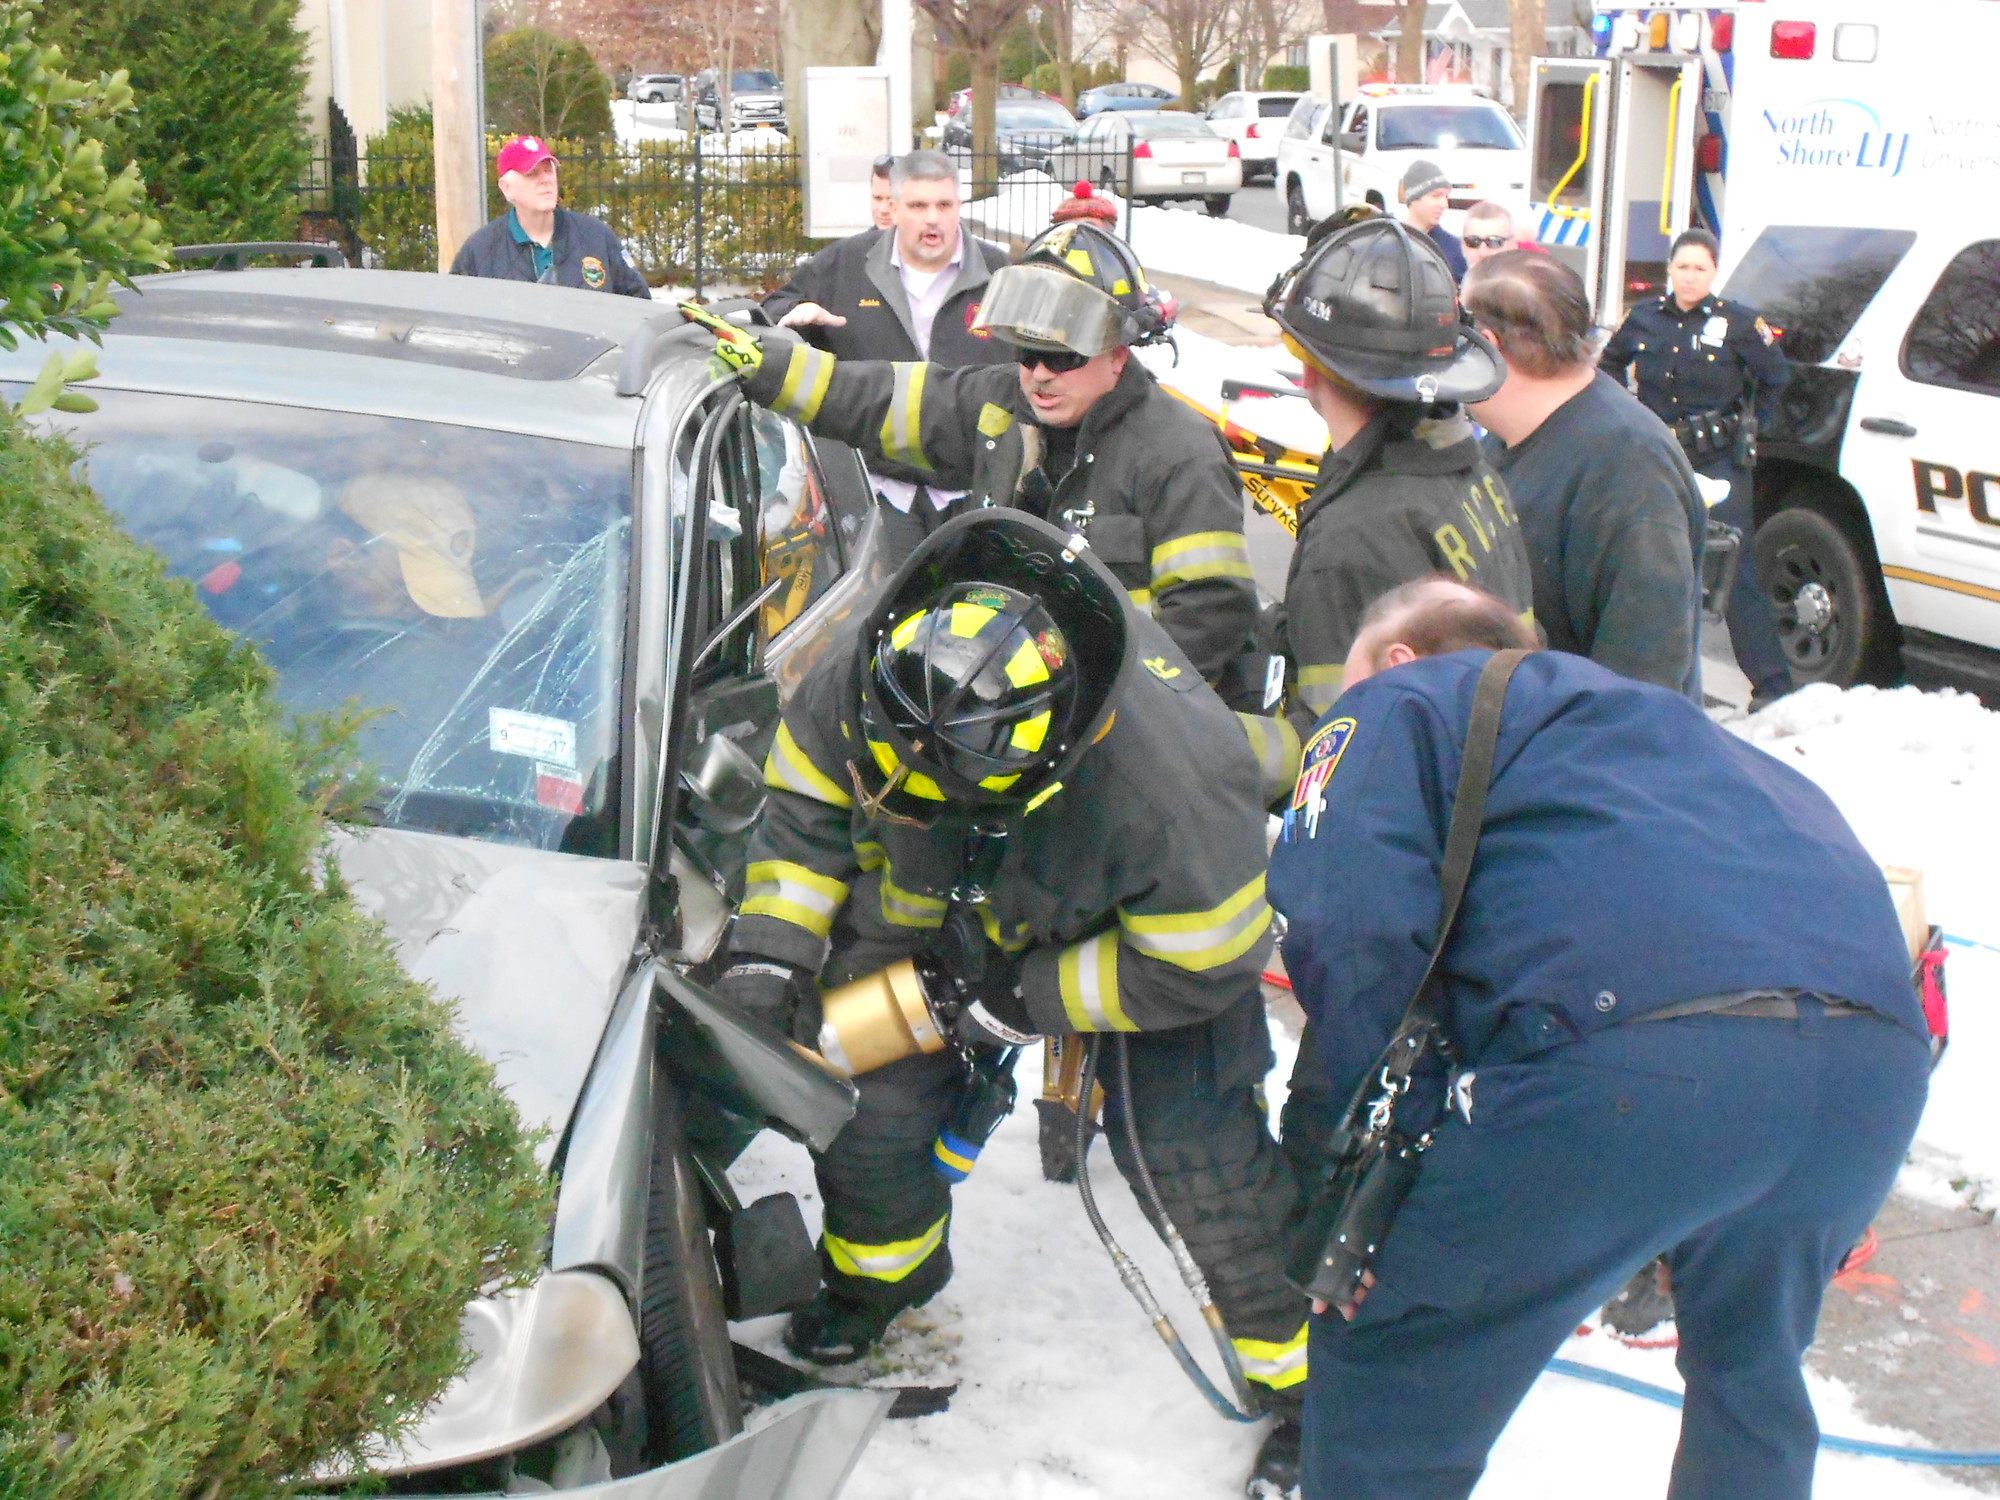 Members of Reliance Hose Co. 3 and Floodlight Rescue Co. No. 1 used the Hurst Cutter tool and the Hurst Spreader tool to open the driver’s door and remove a man pinned in his car at the intersection of Long Beach Road and Princeton Road on Feb. 1.